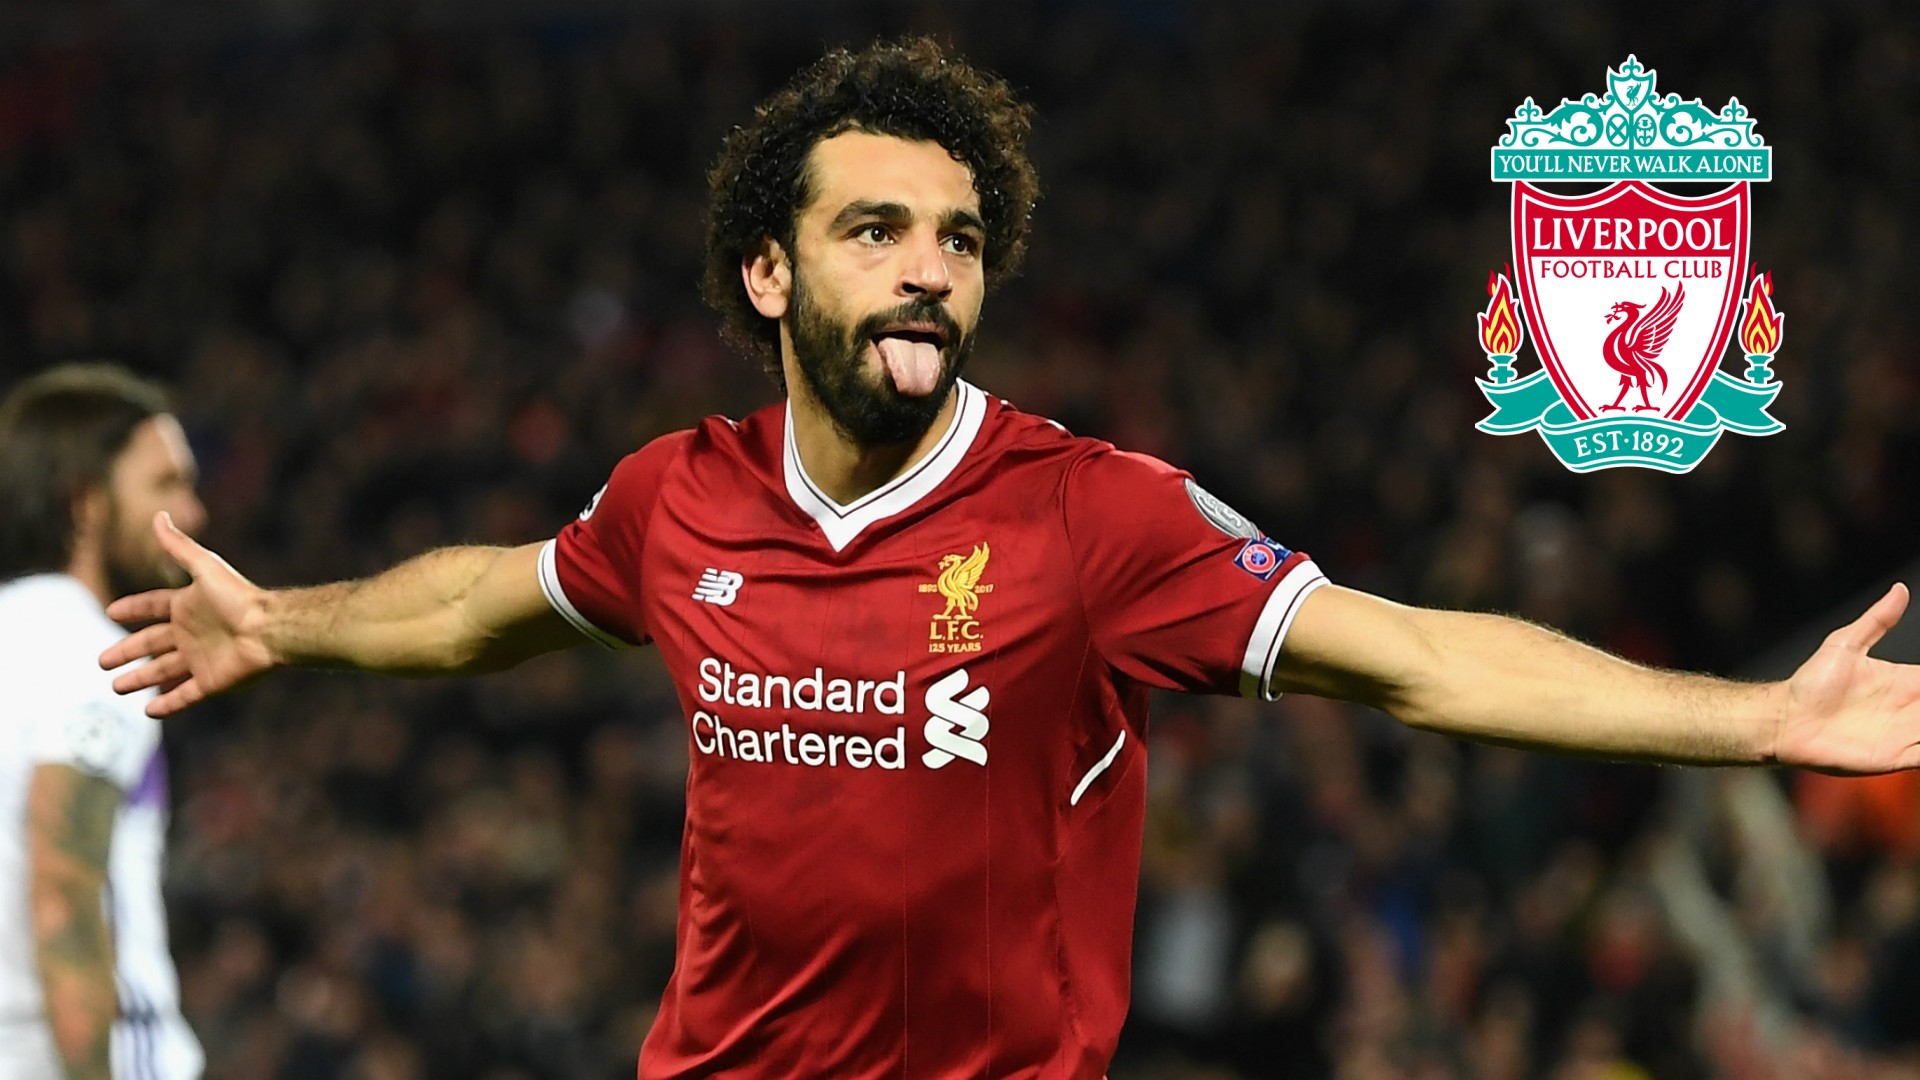 Mohamed Salah Desktop Backgrounds HD with image resolution 1920x1080 pixel. You can use this wallpaper as background for your desktop Computer Screensavers, Android or iPhone smartphones